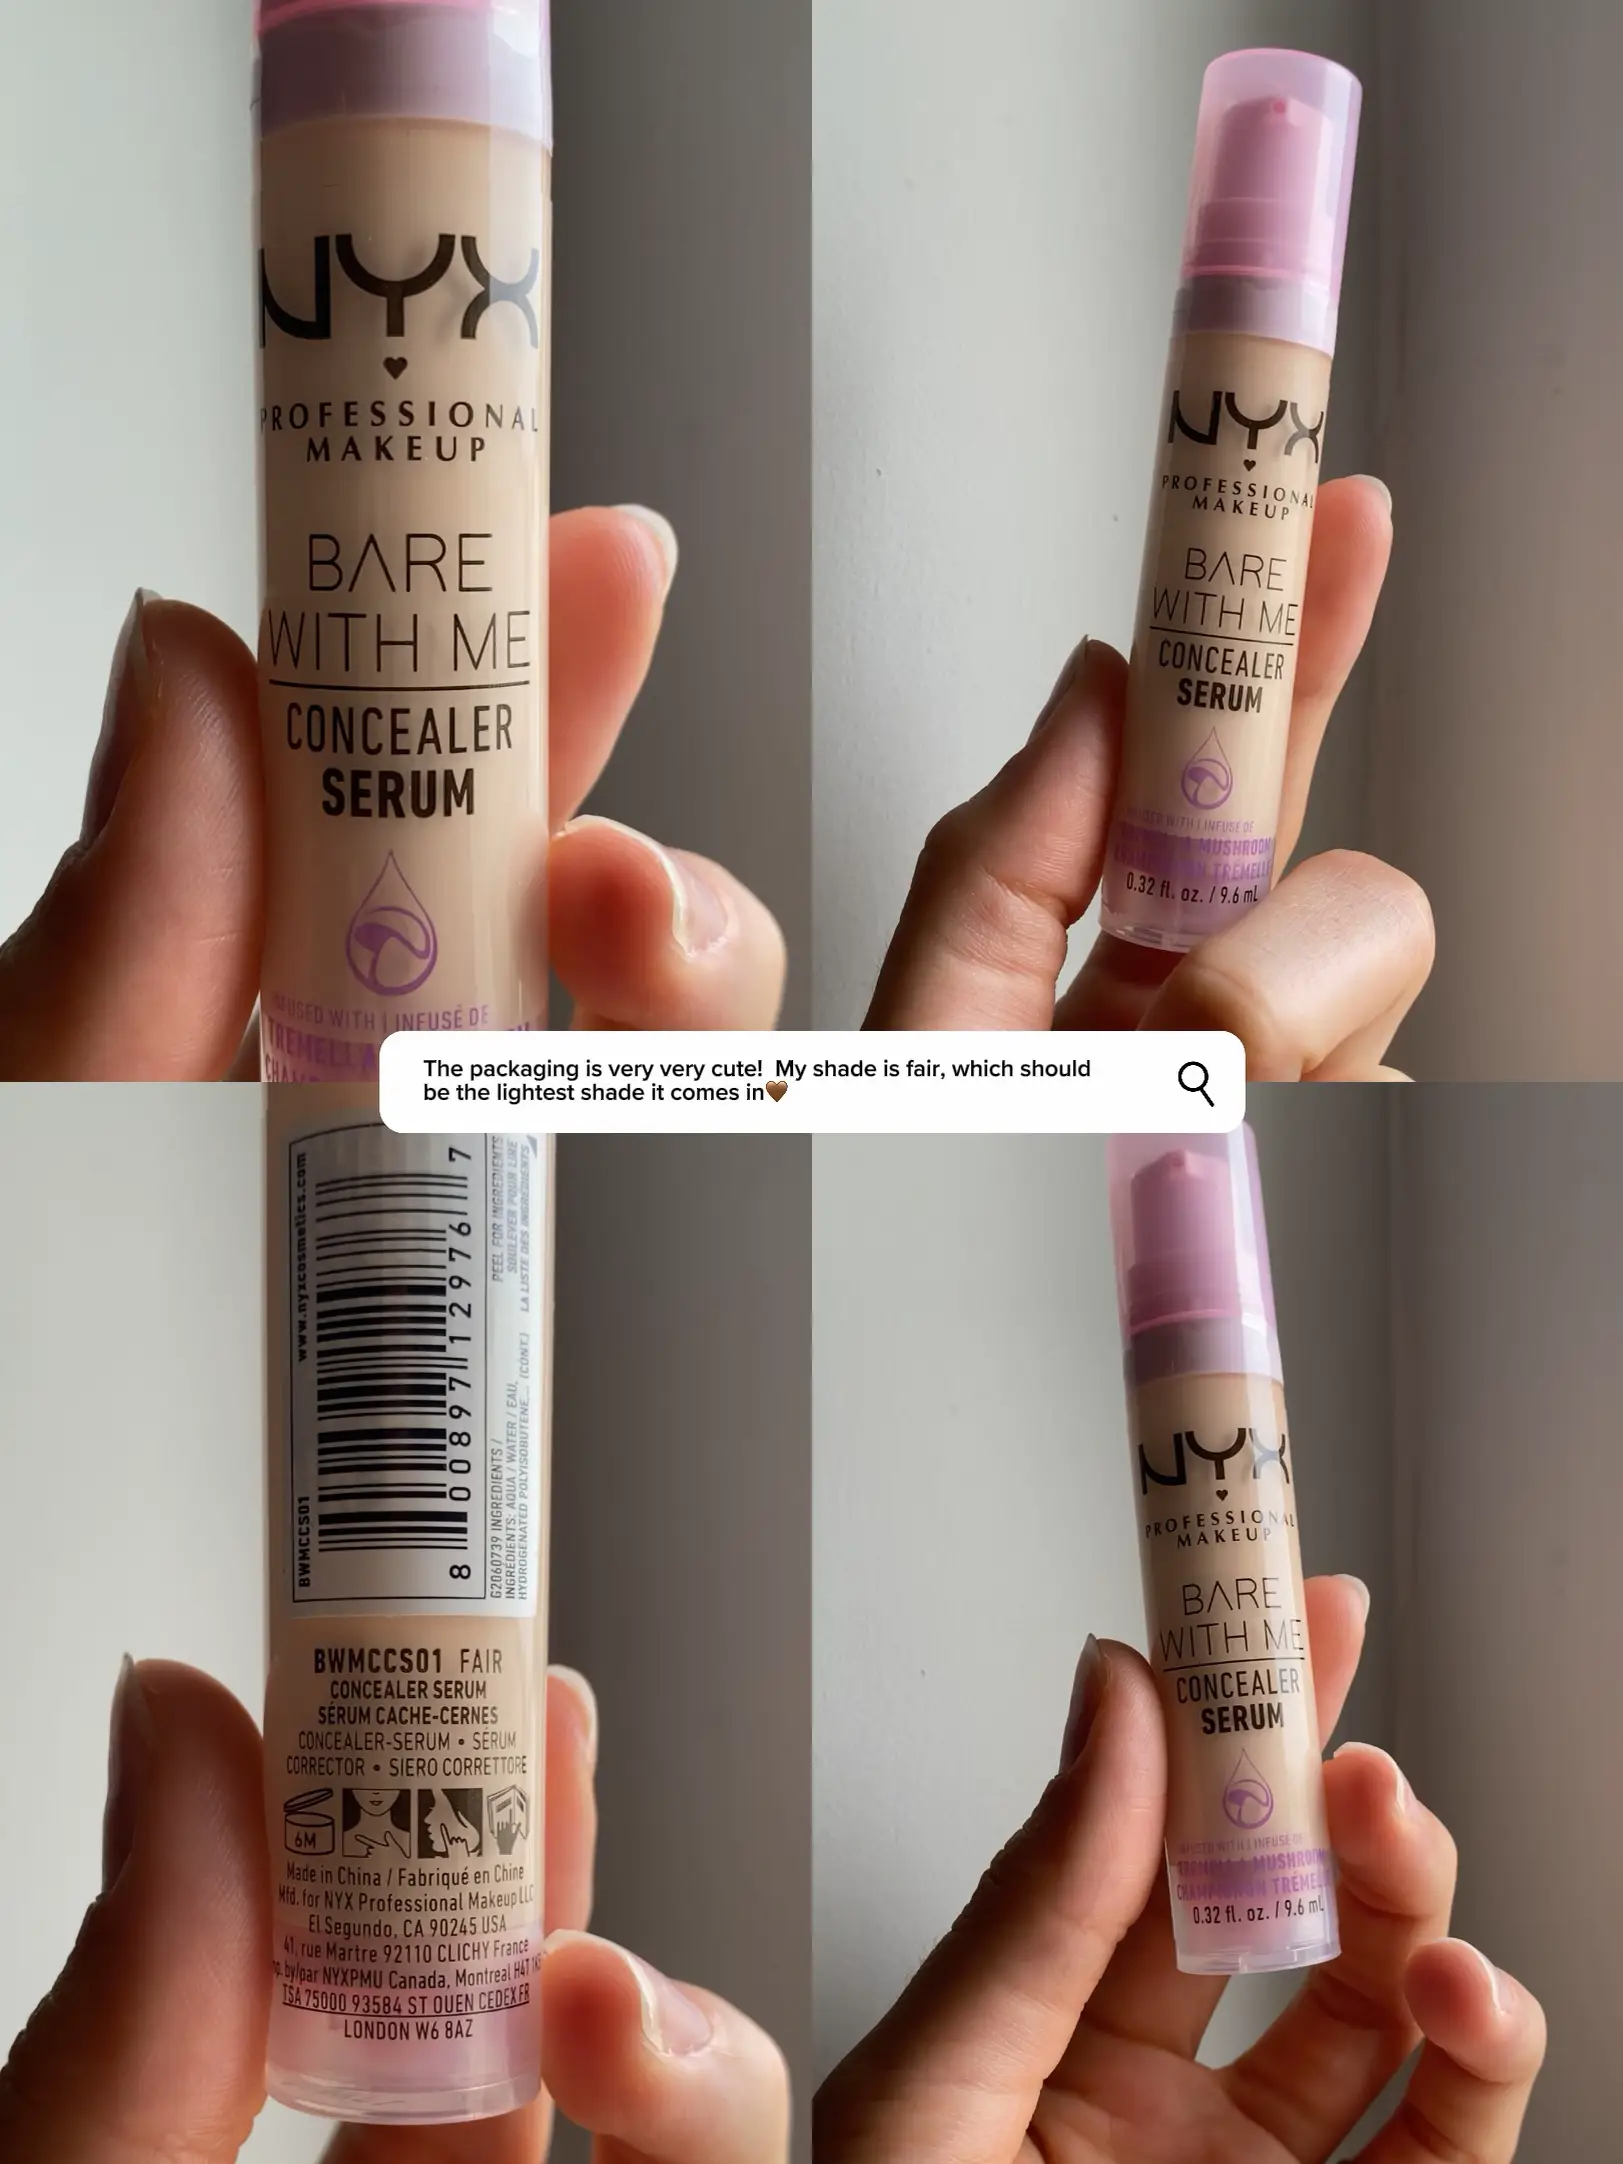 IT?😱 Gallery NYX Me WORTH With Lemon8 dolcevitamakeup Bare it Concealer by posted | Is | |